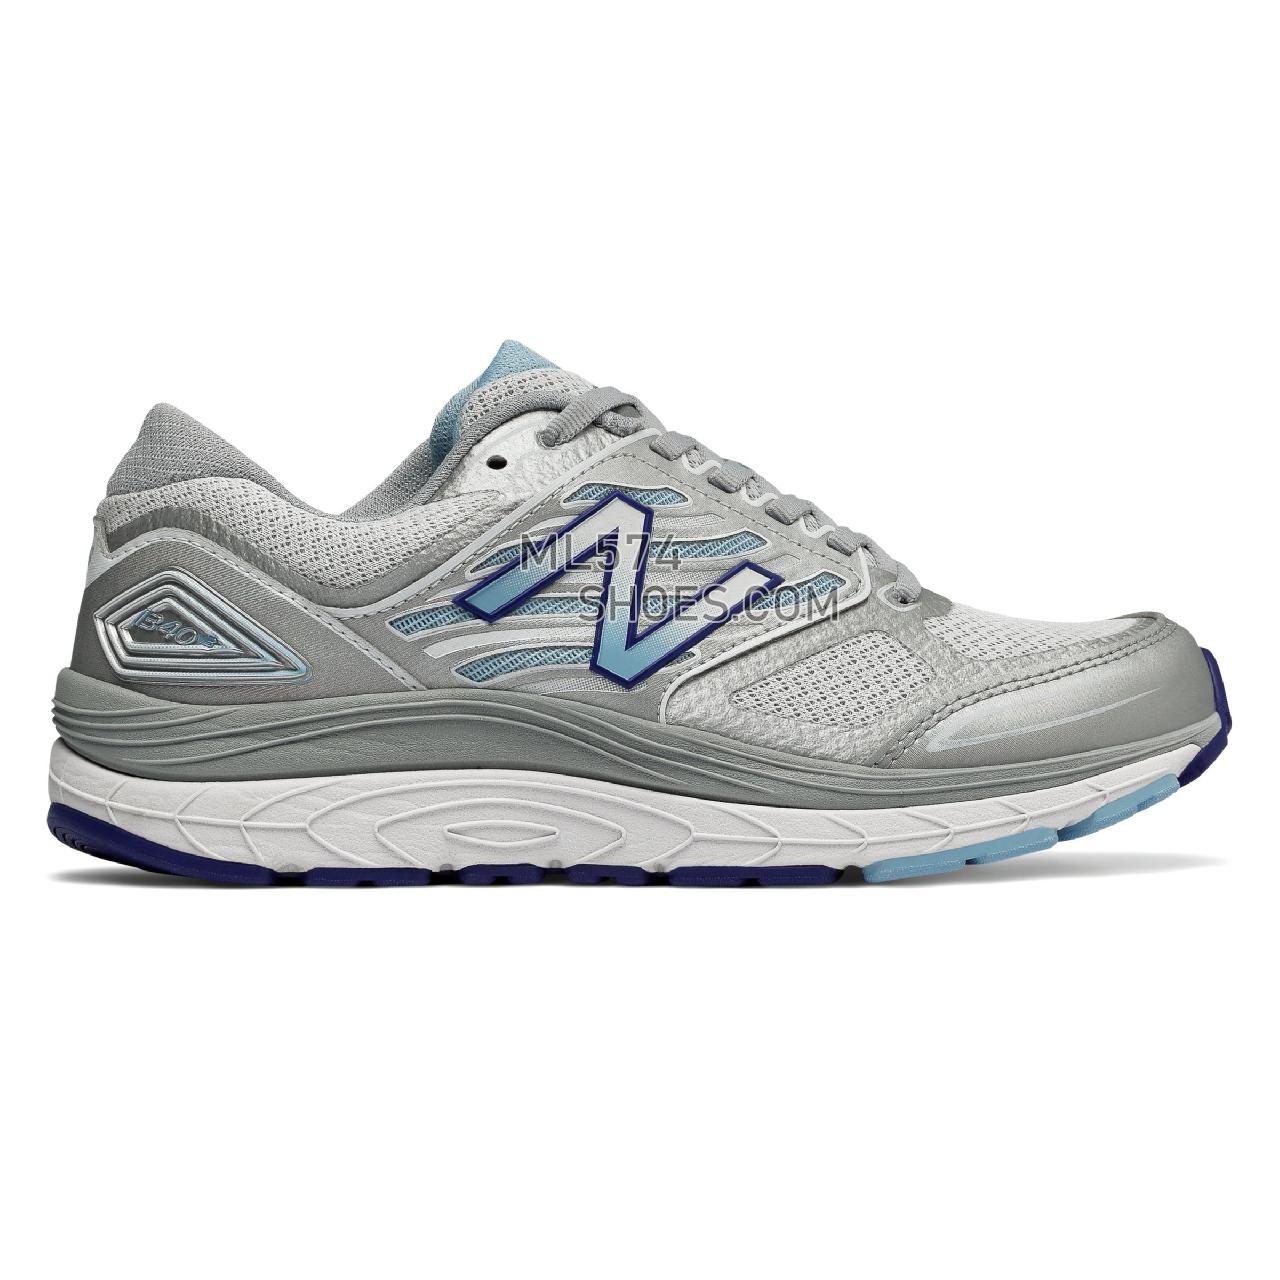 New Balance 1340v3 - Women's 1340 - Running White with Clear Sky - W1340WP3